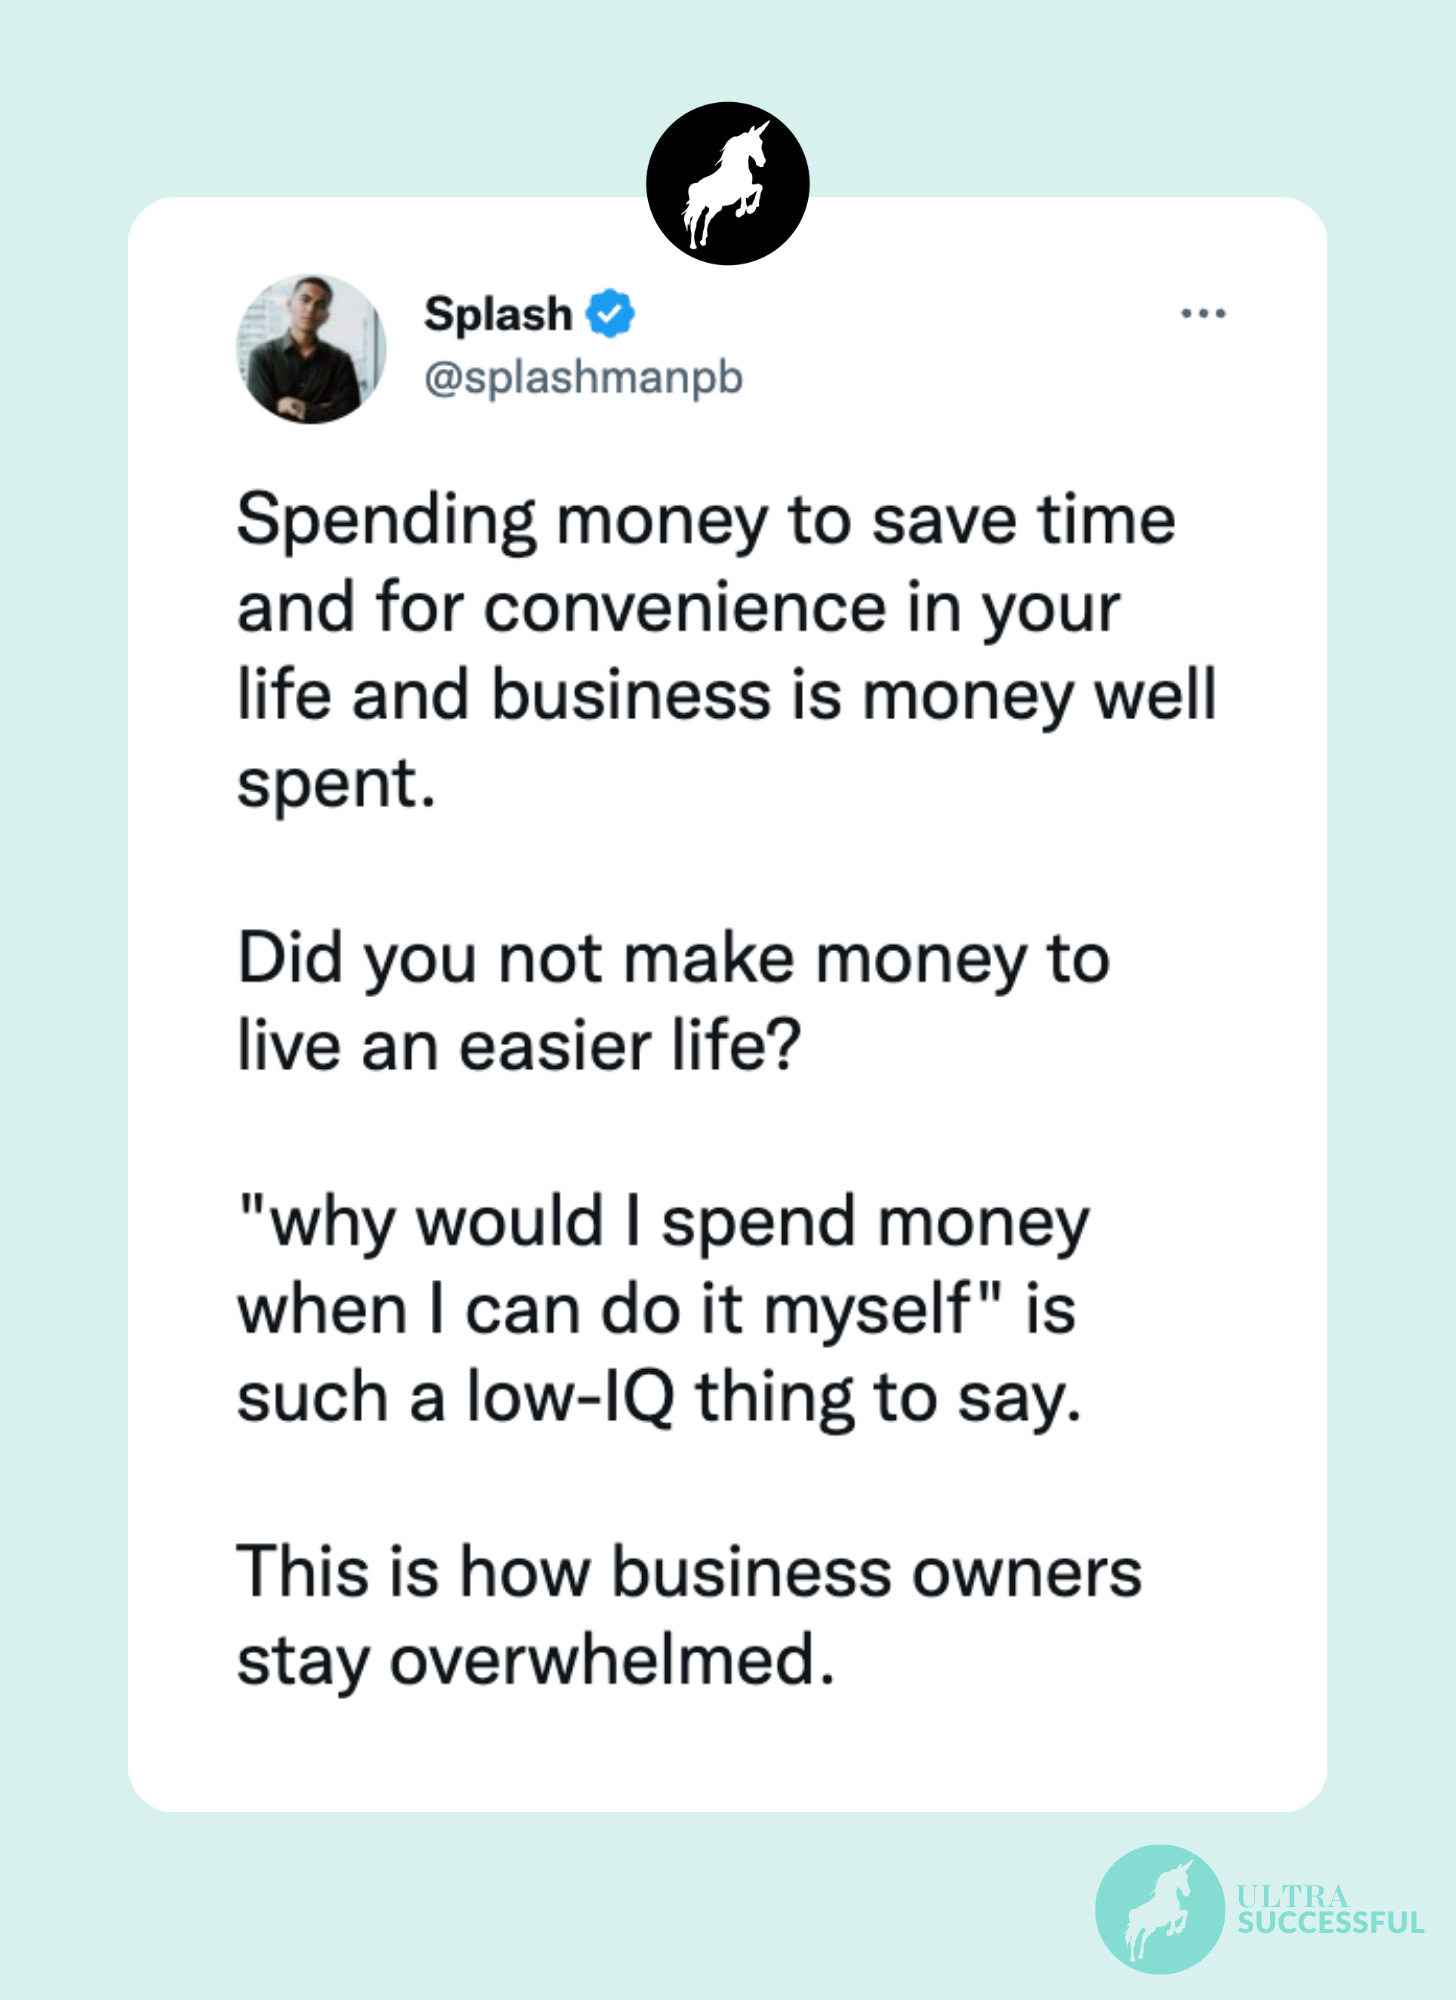 @splashmanpb: Spending money to save time and for convenience in your life and business is money well spent.   Did you not make money to live an easier life?   "why would I spend money when I can do it myself" is such a low-IQ thing to say.  This is how business owners stay overwhelmed.